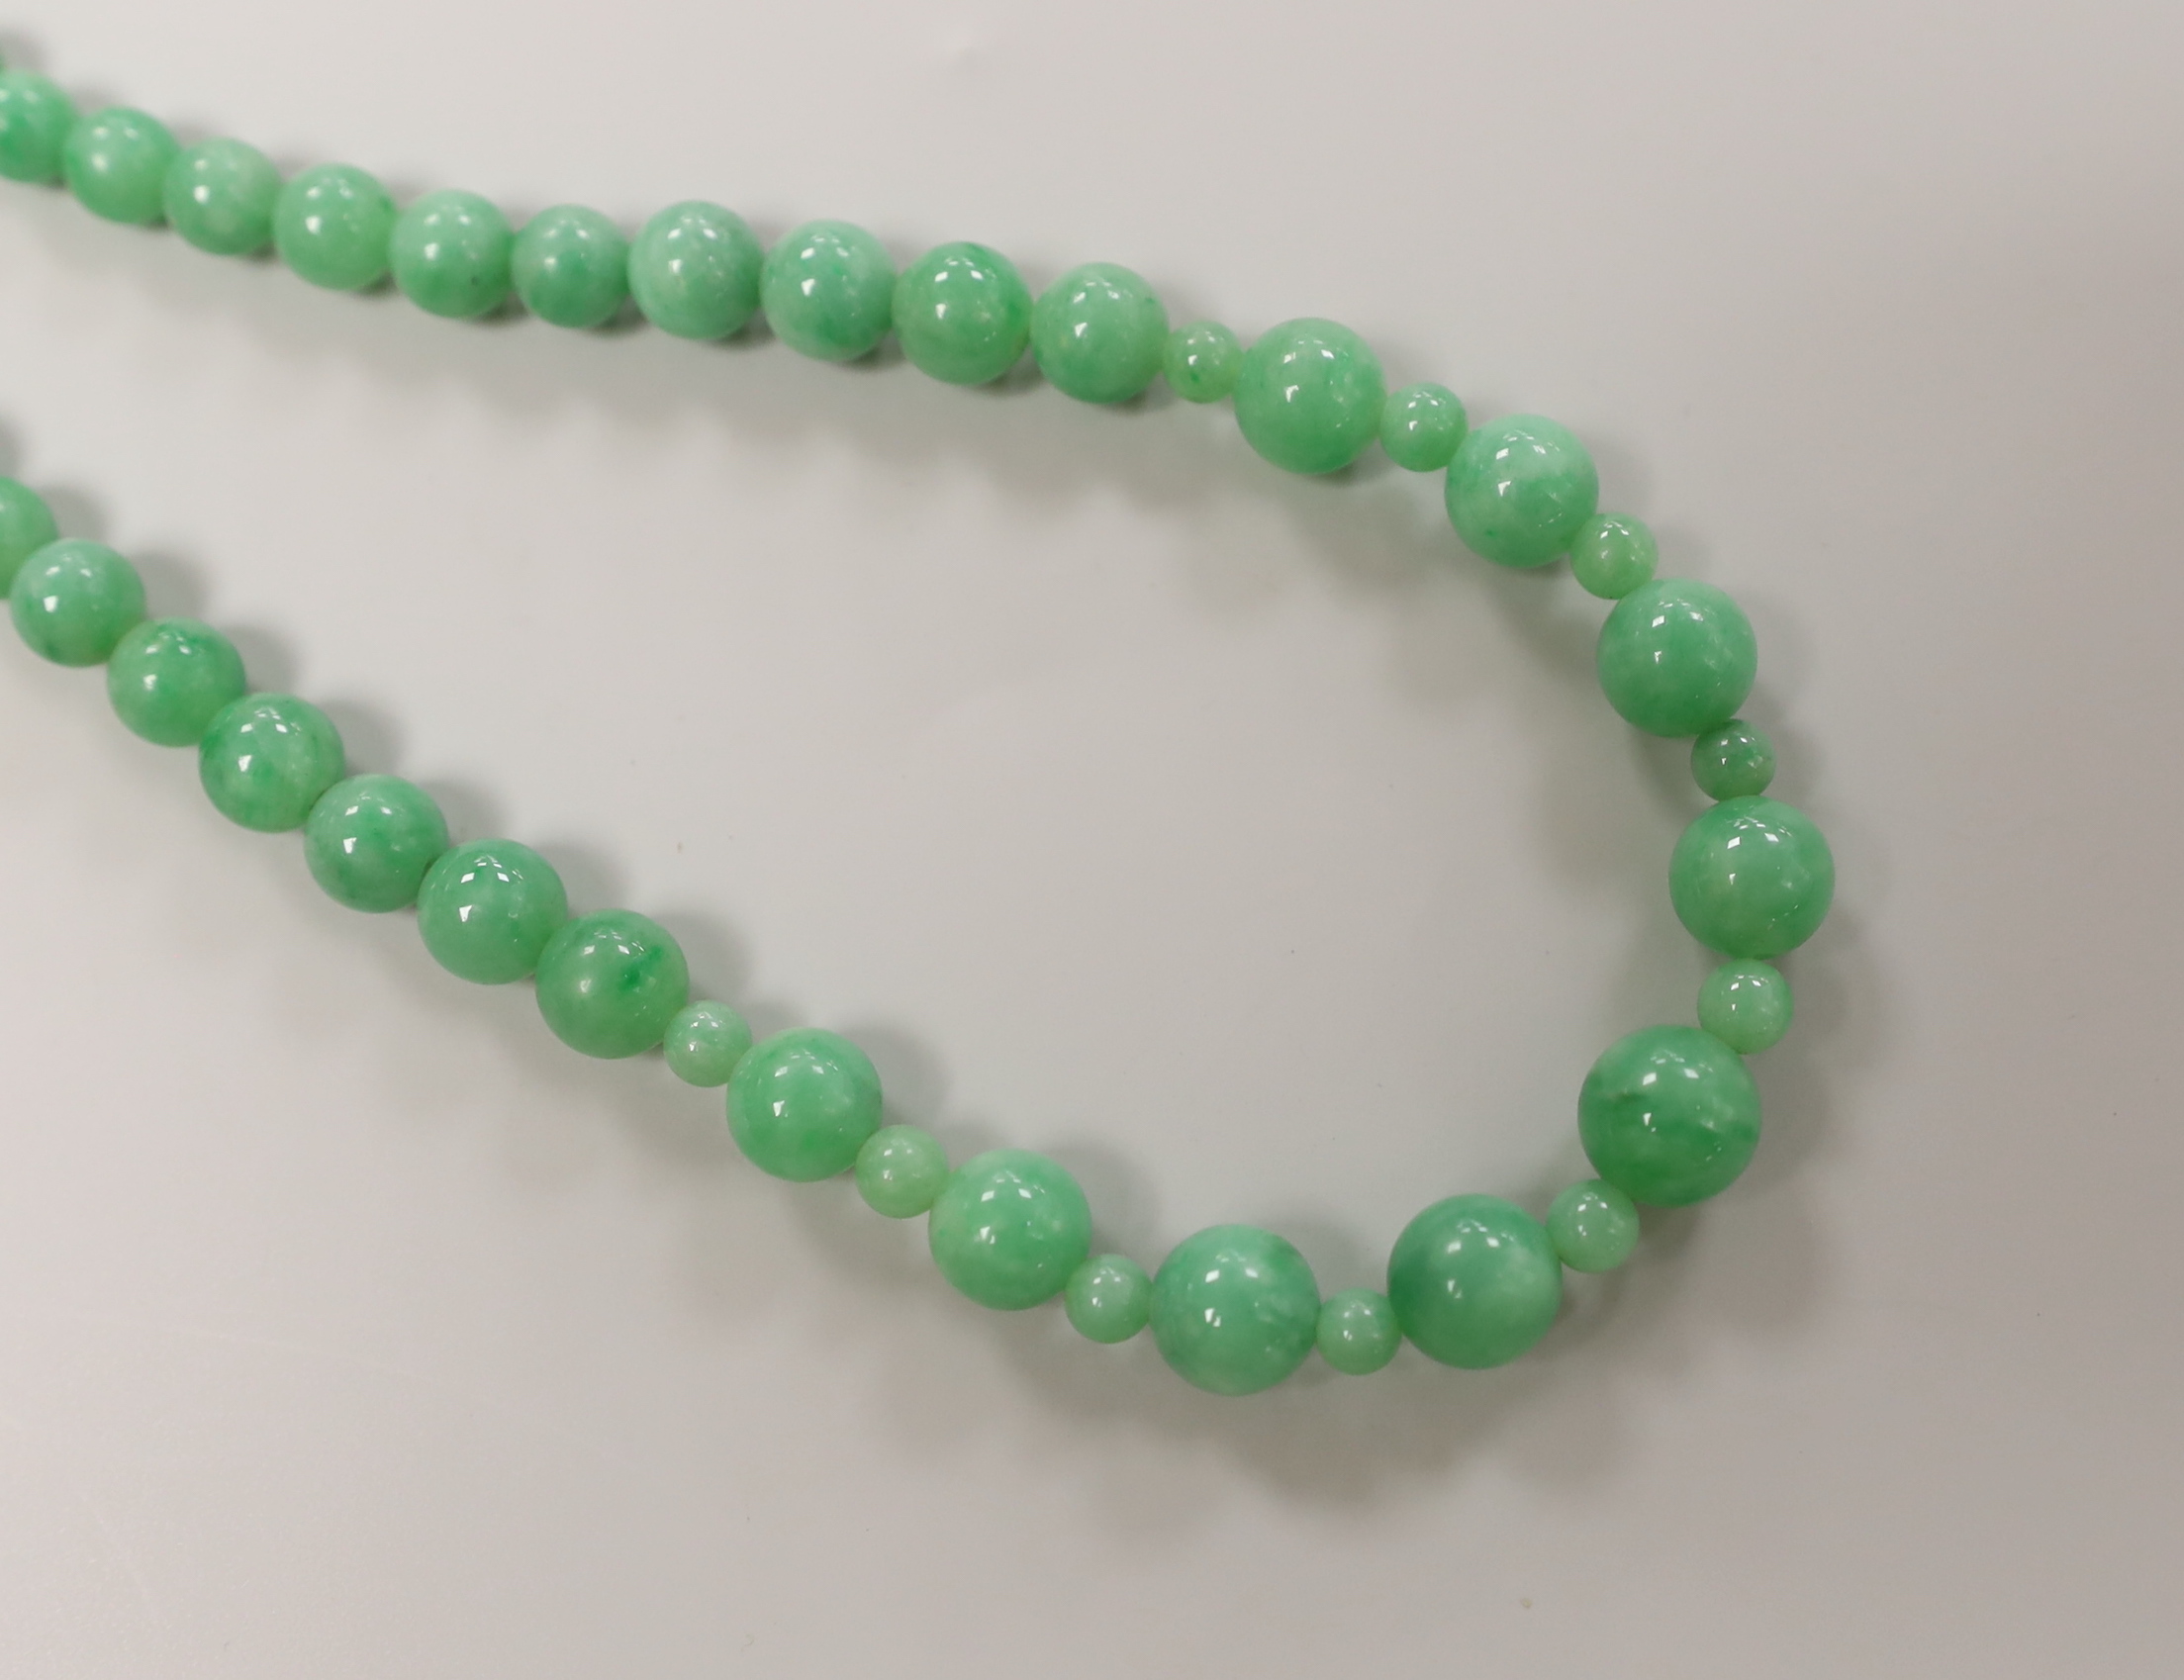 A Chinese jadeite carving and jadeite bead necklace, carving 6.5cm long